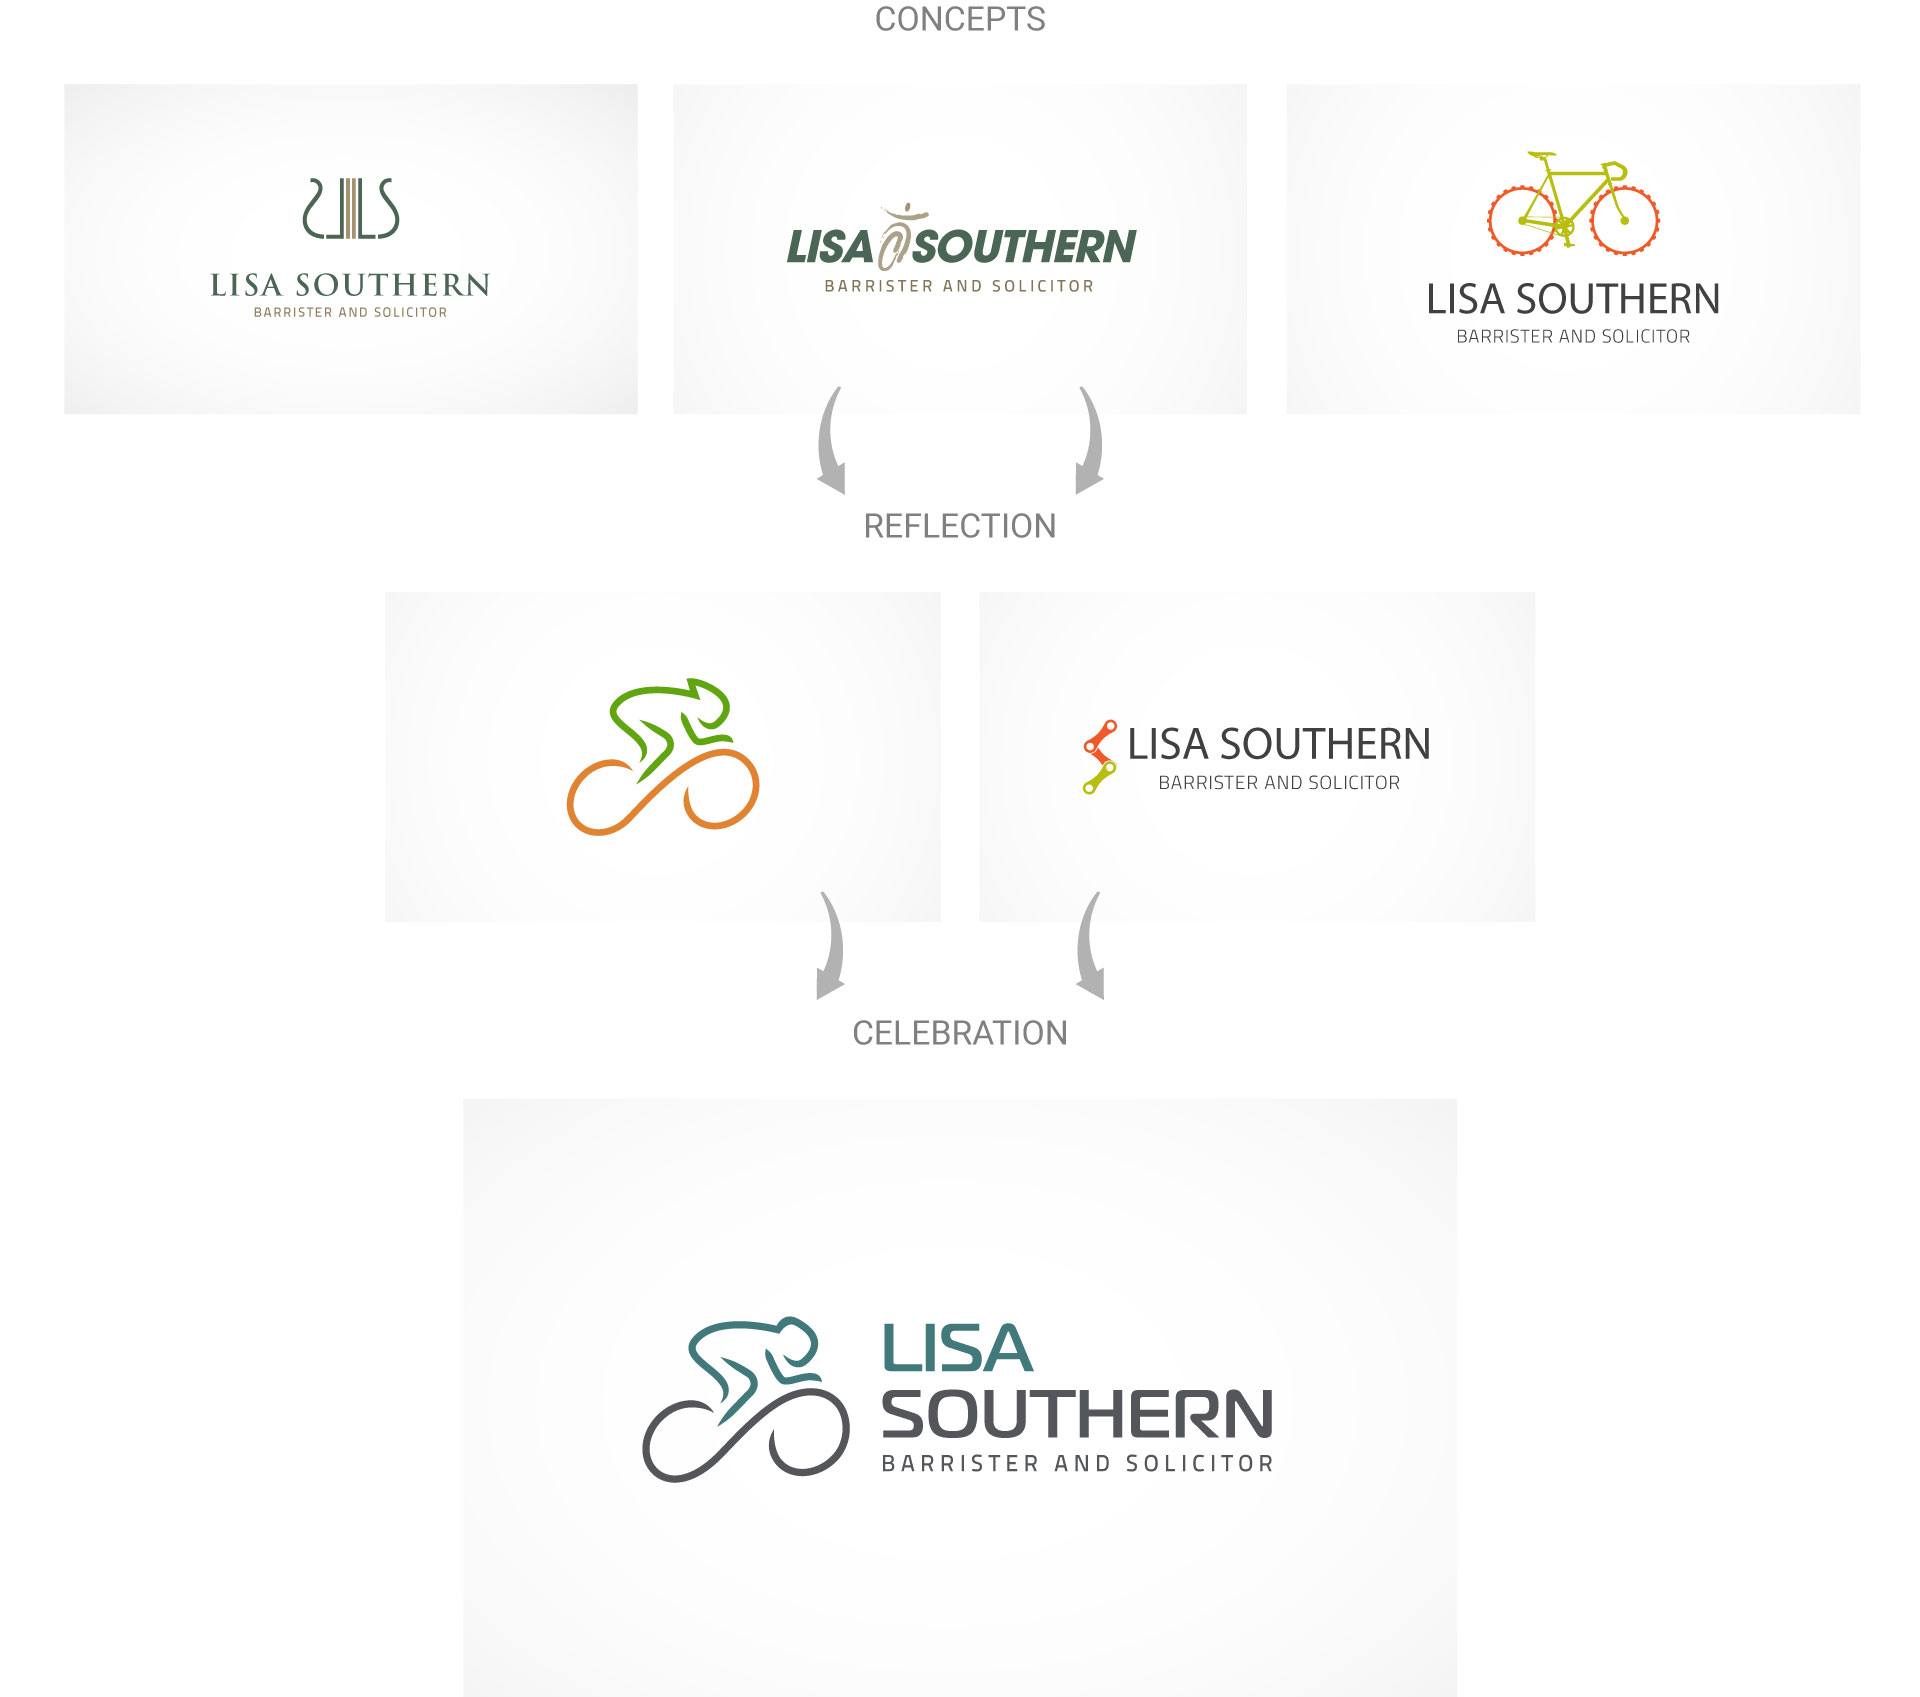 lisa-southern-logo-design-process-by-mapleweb-vancouver-canada